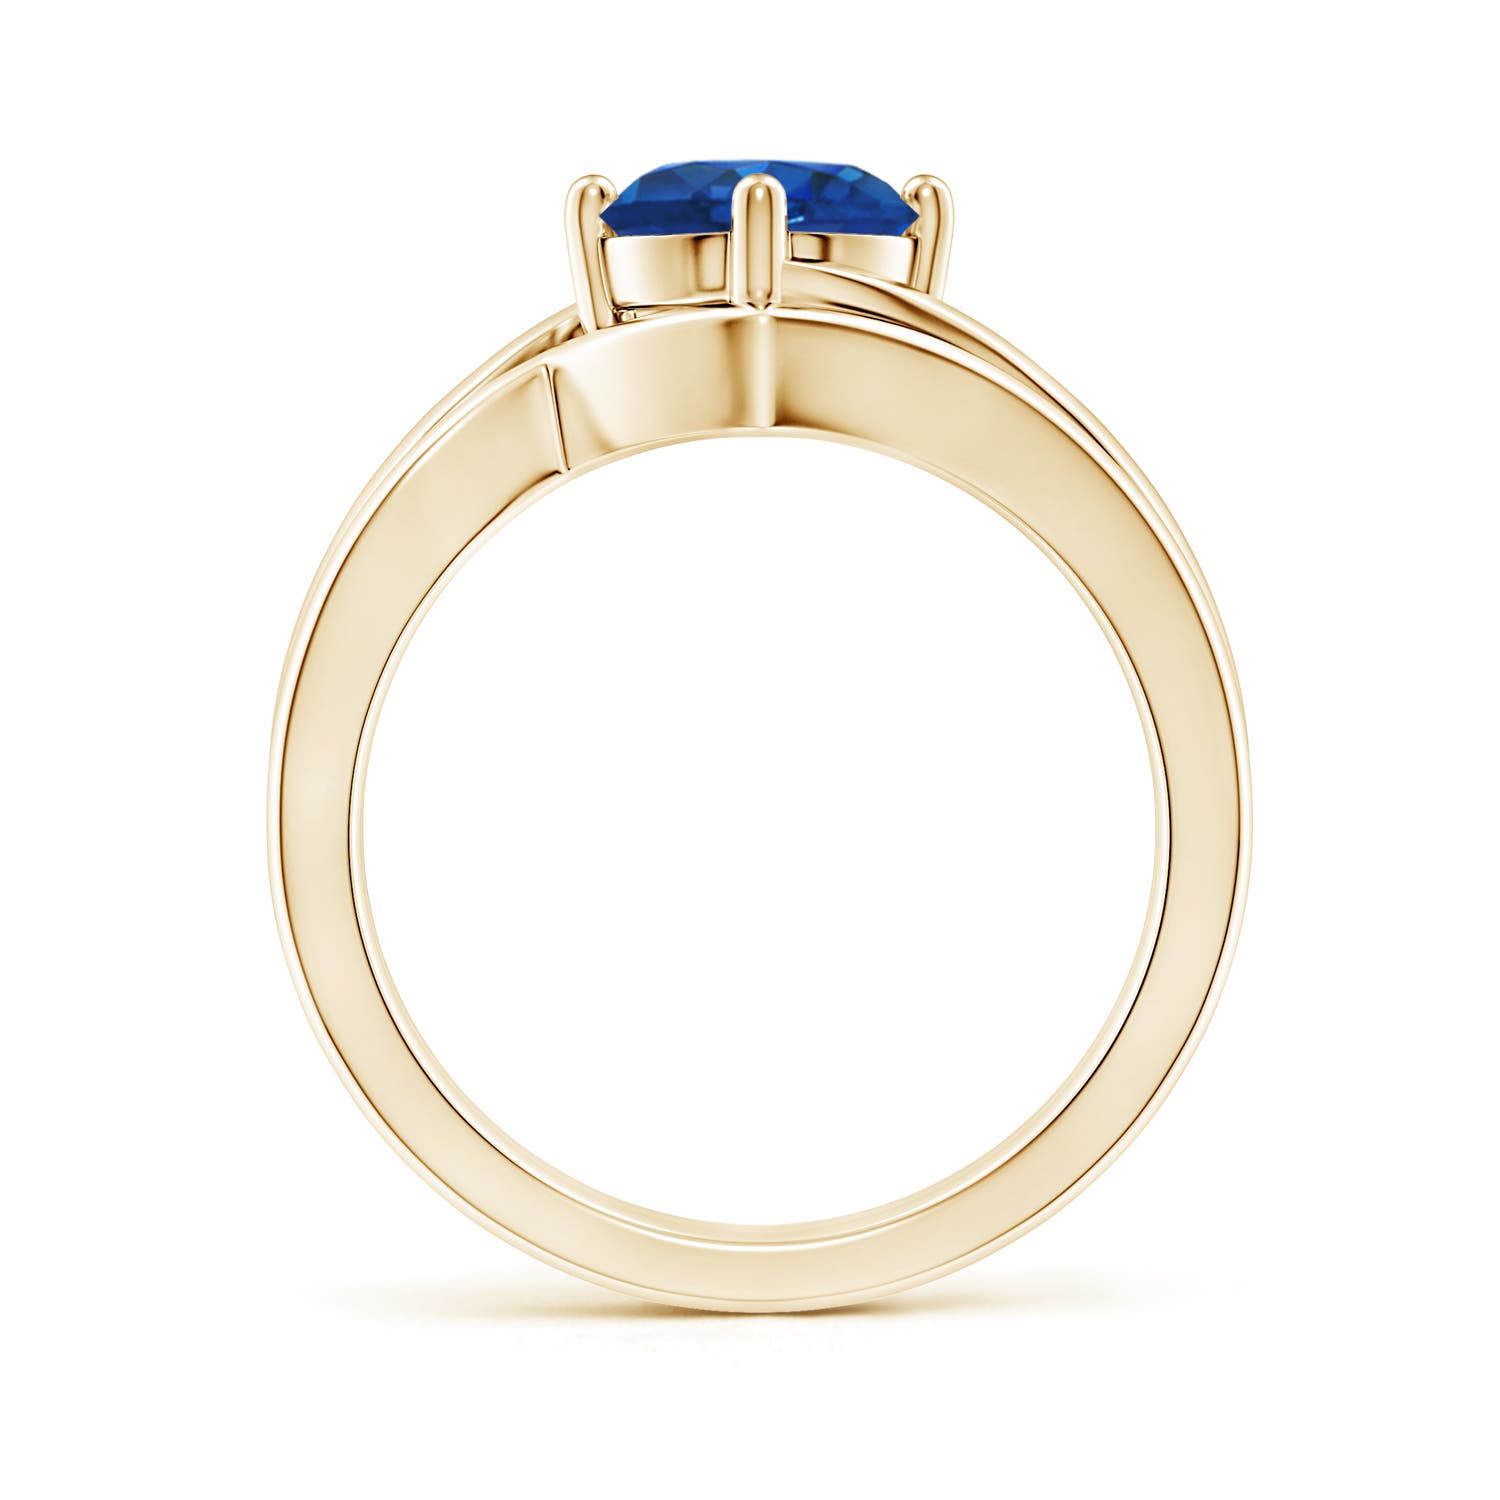 AAA - Blue Sapphire / 1.6 CT / 14 KT Yellow Gold